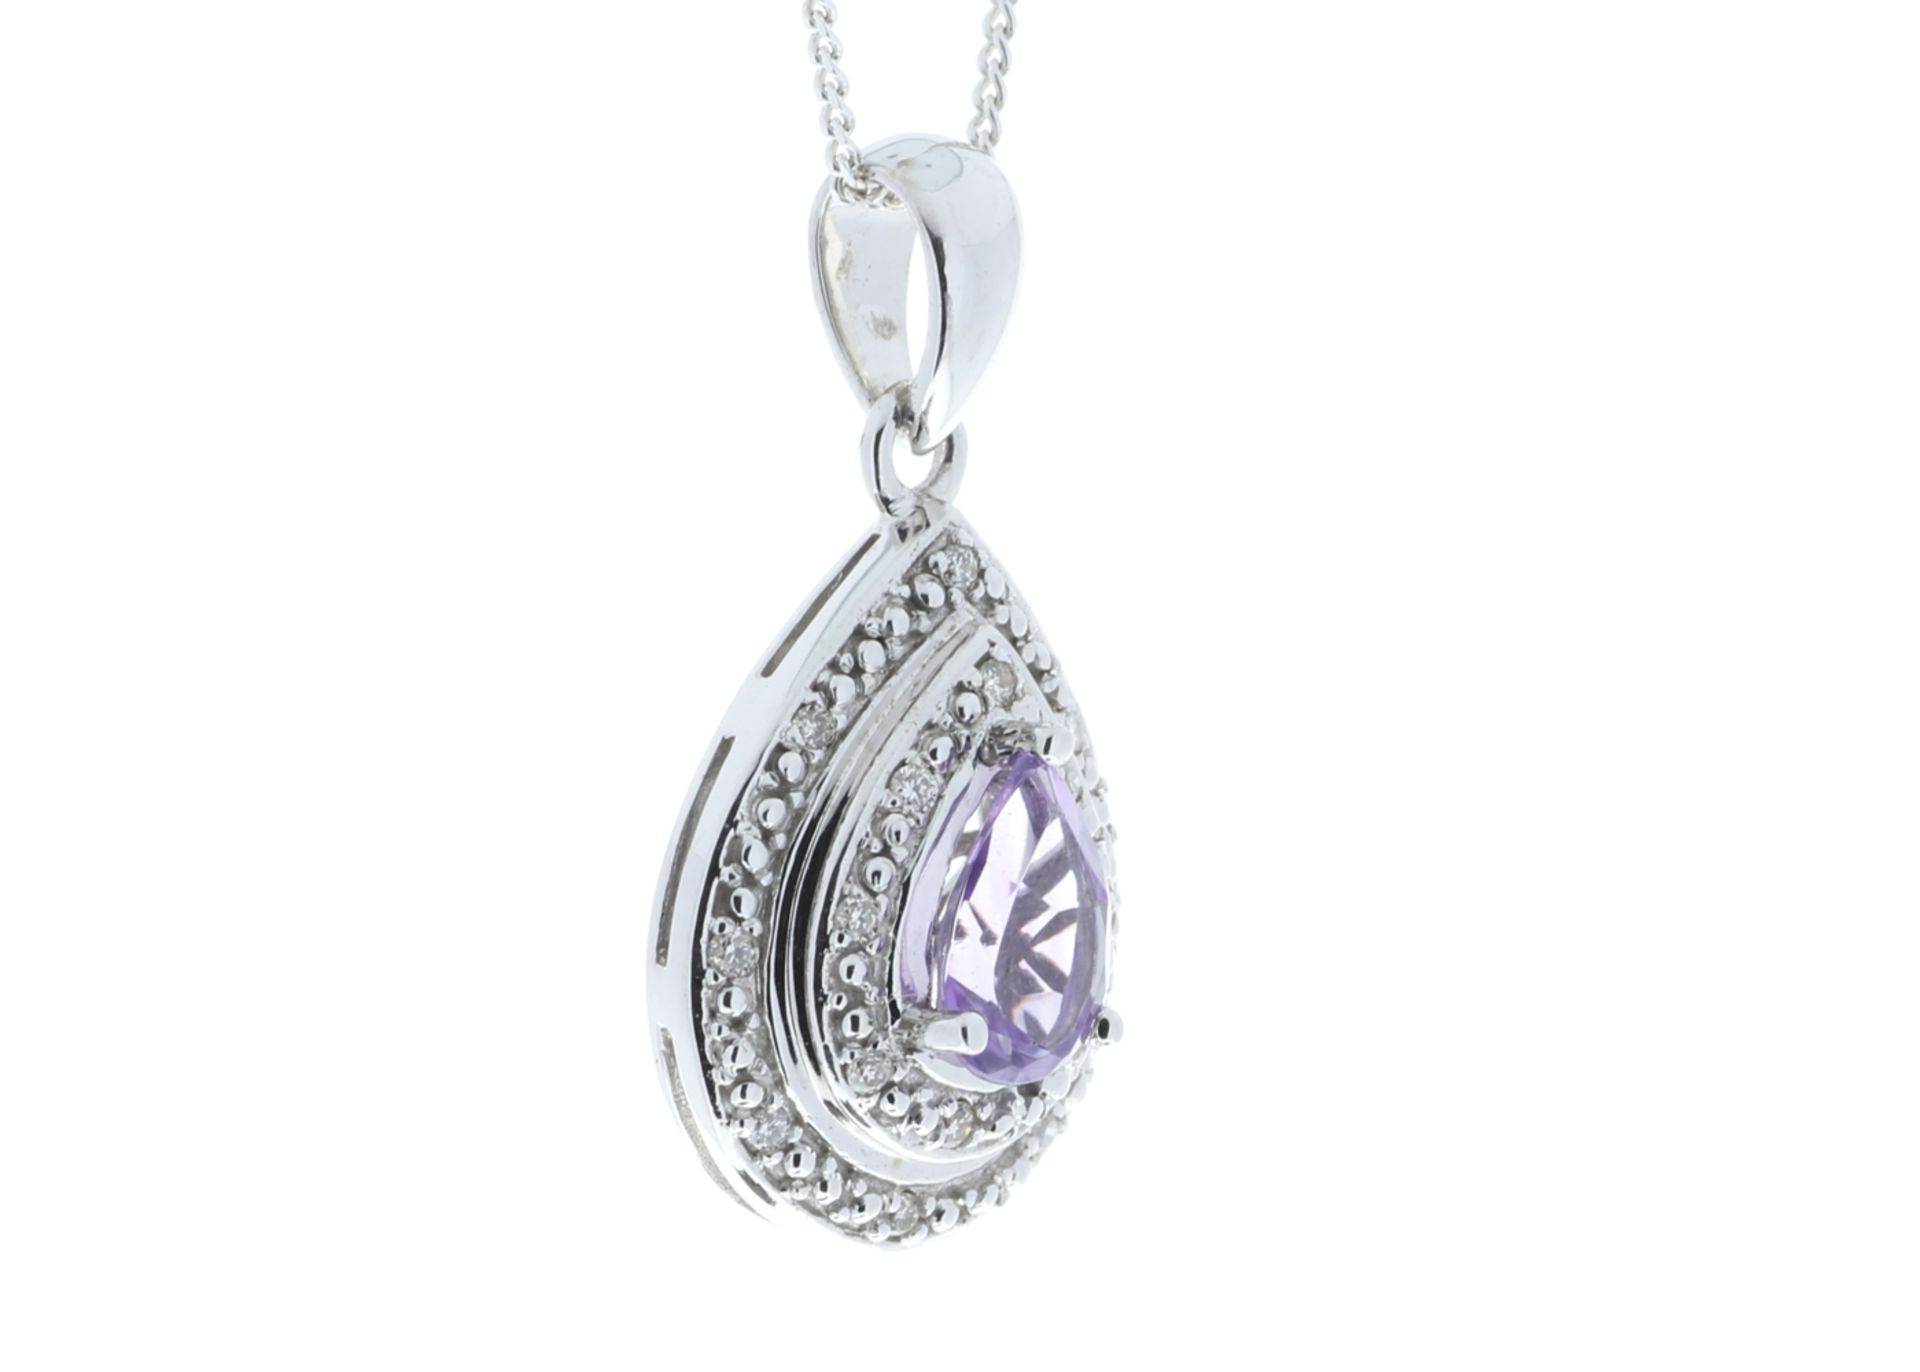 9ct White Gold Amethyst Pear Shaped Cluster Diamond Pendant (A0.63) 0.08 Carats - Image 2 of 5